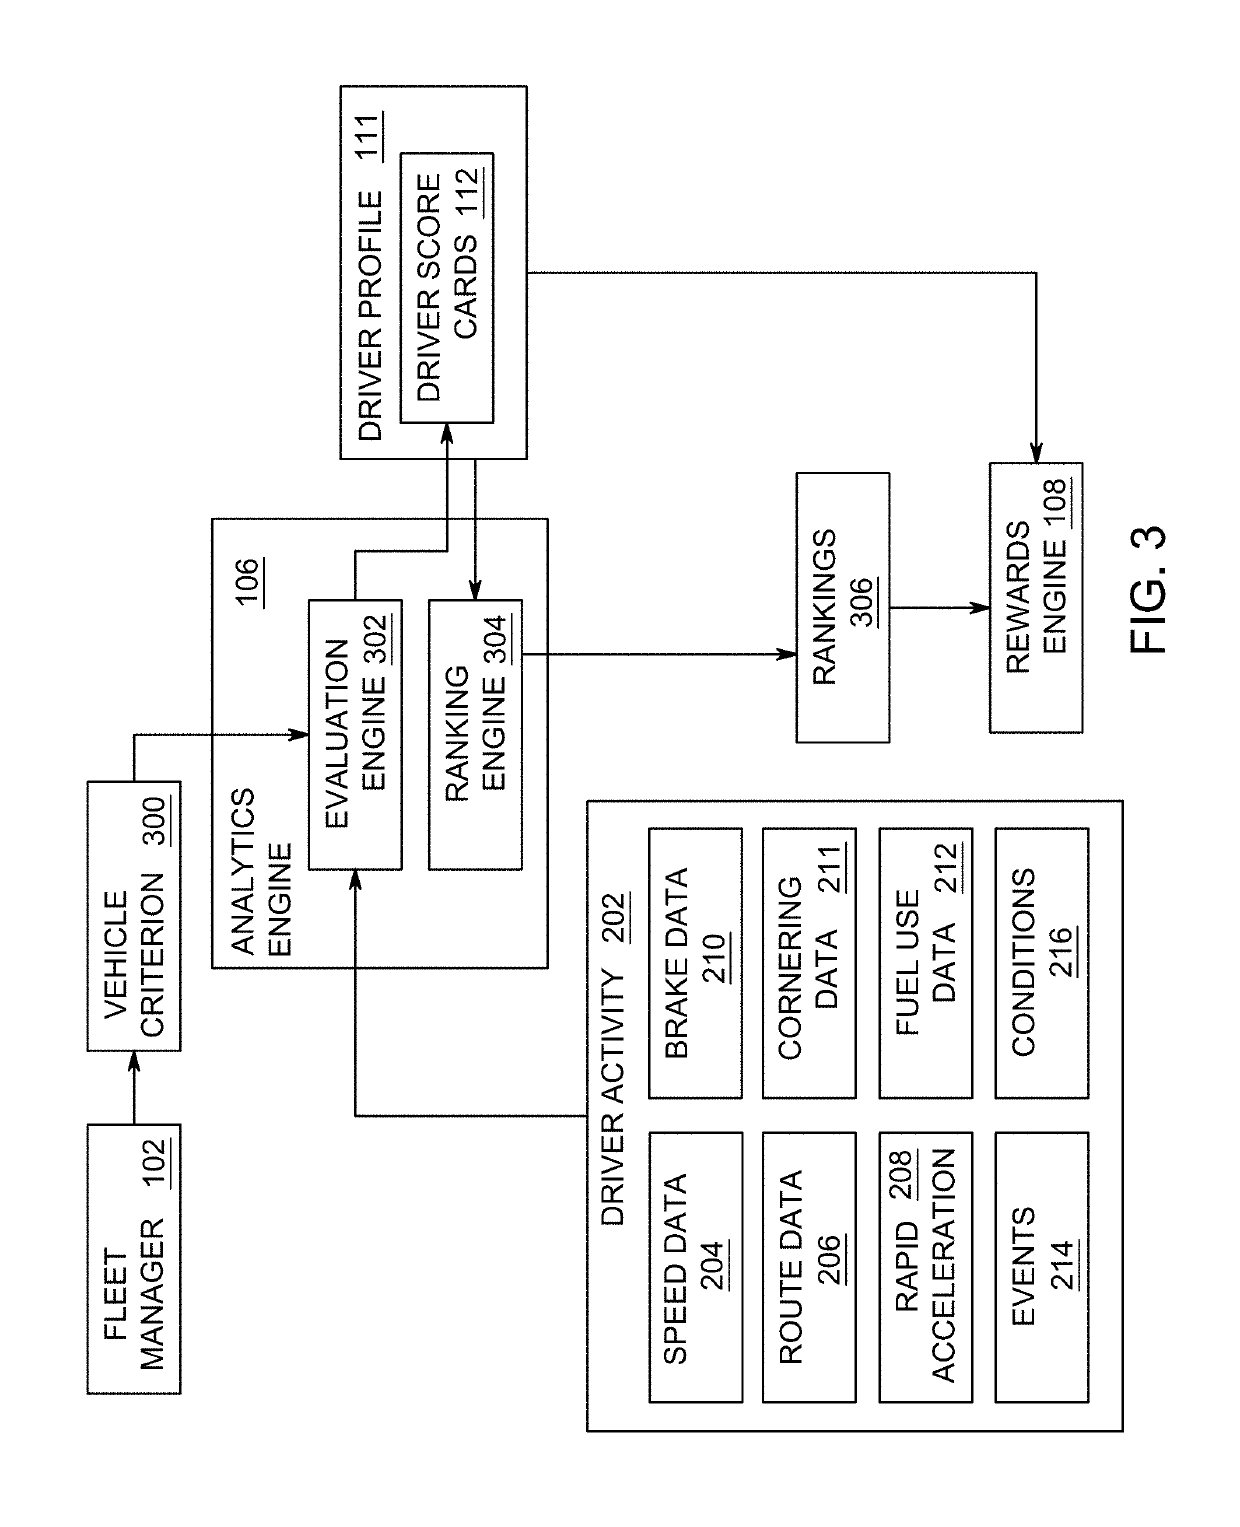 Method and apparatus for evaluating driver performance and determining driver rewards